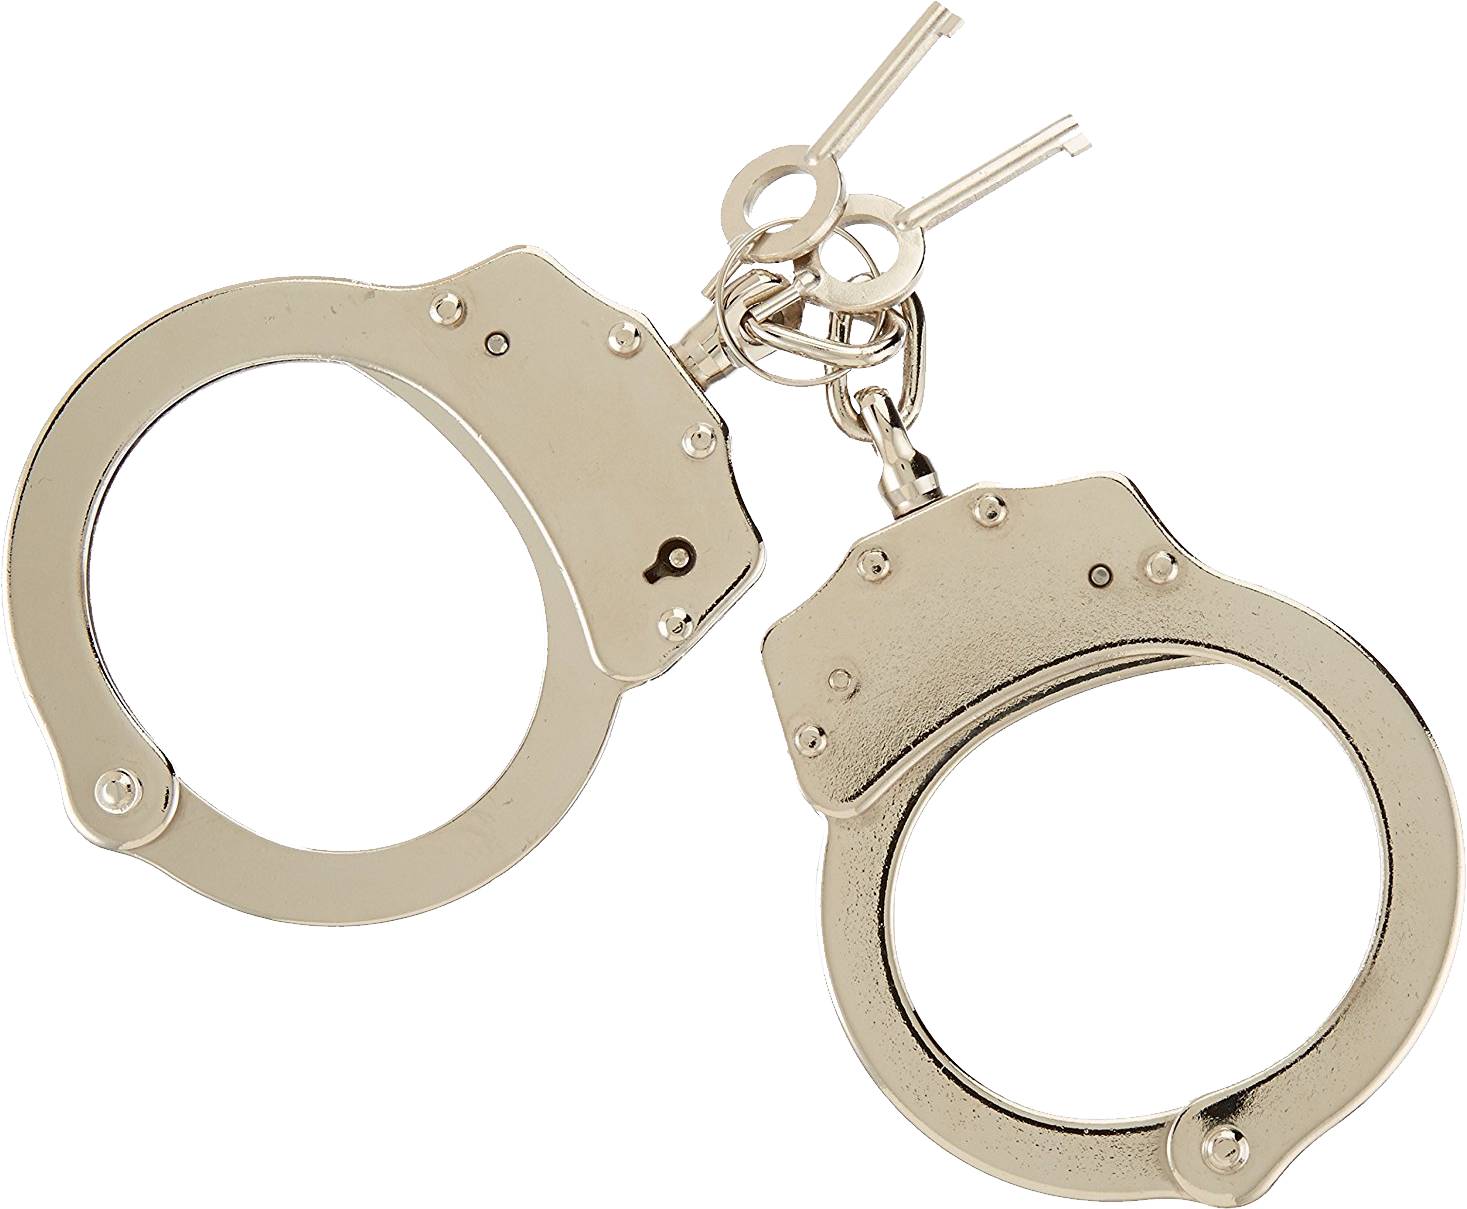 Handcuff clipart accessory. Golden handcuffs png image